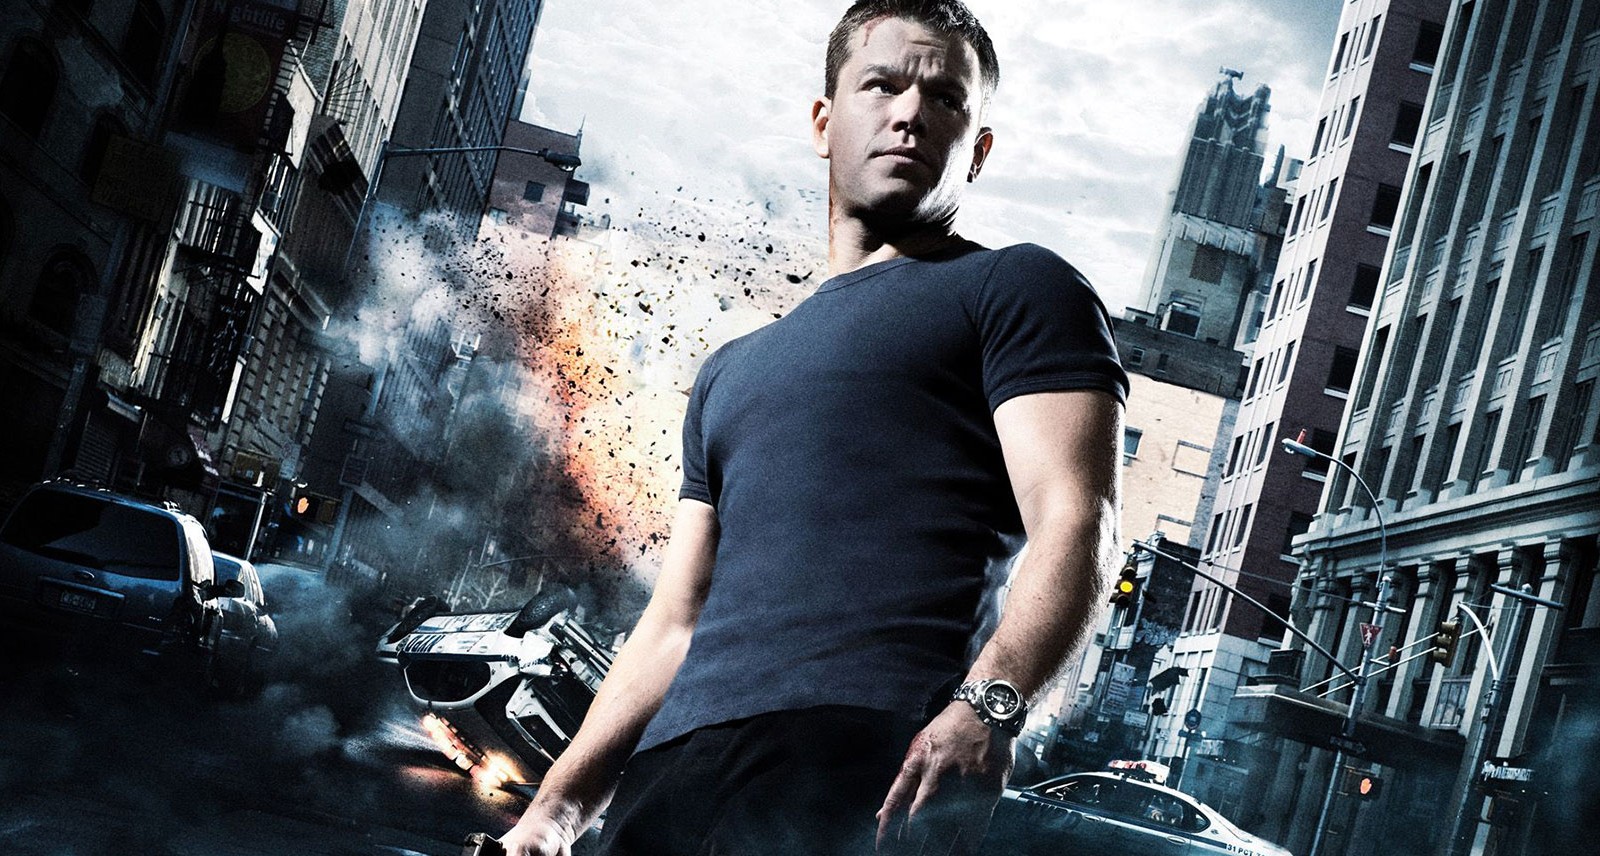 are there any more jason bourne movies coming out